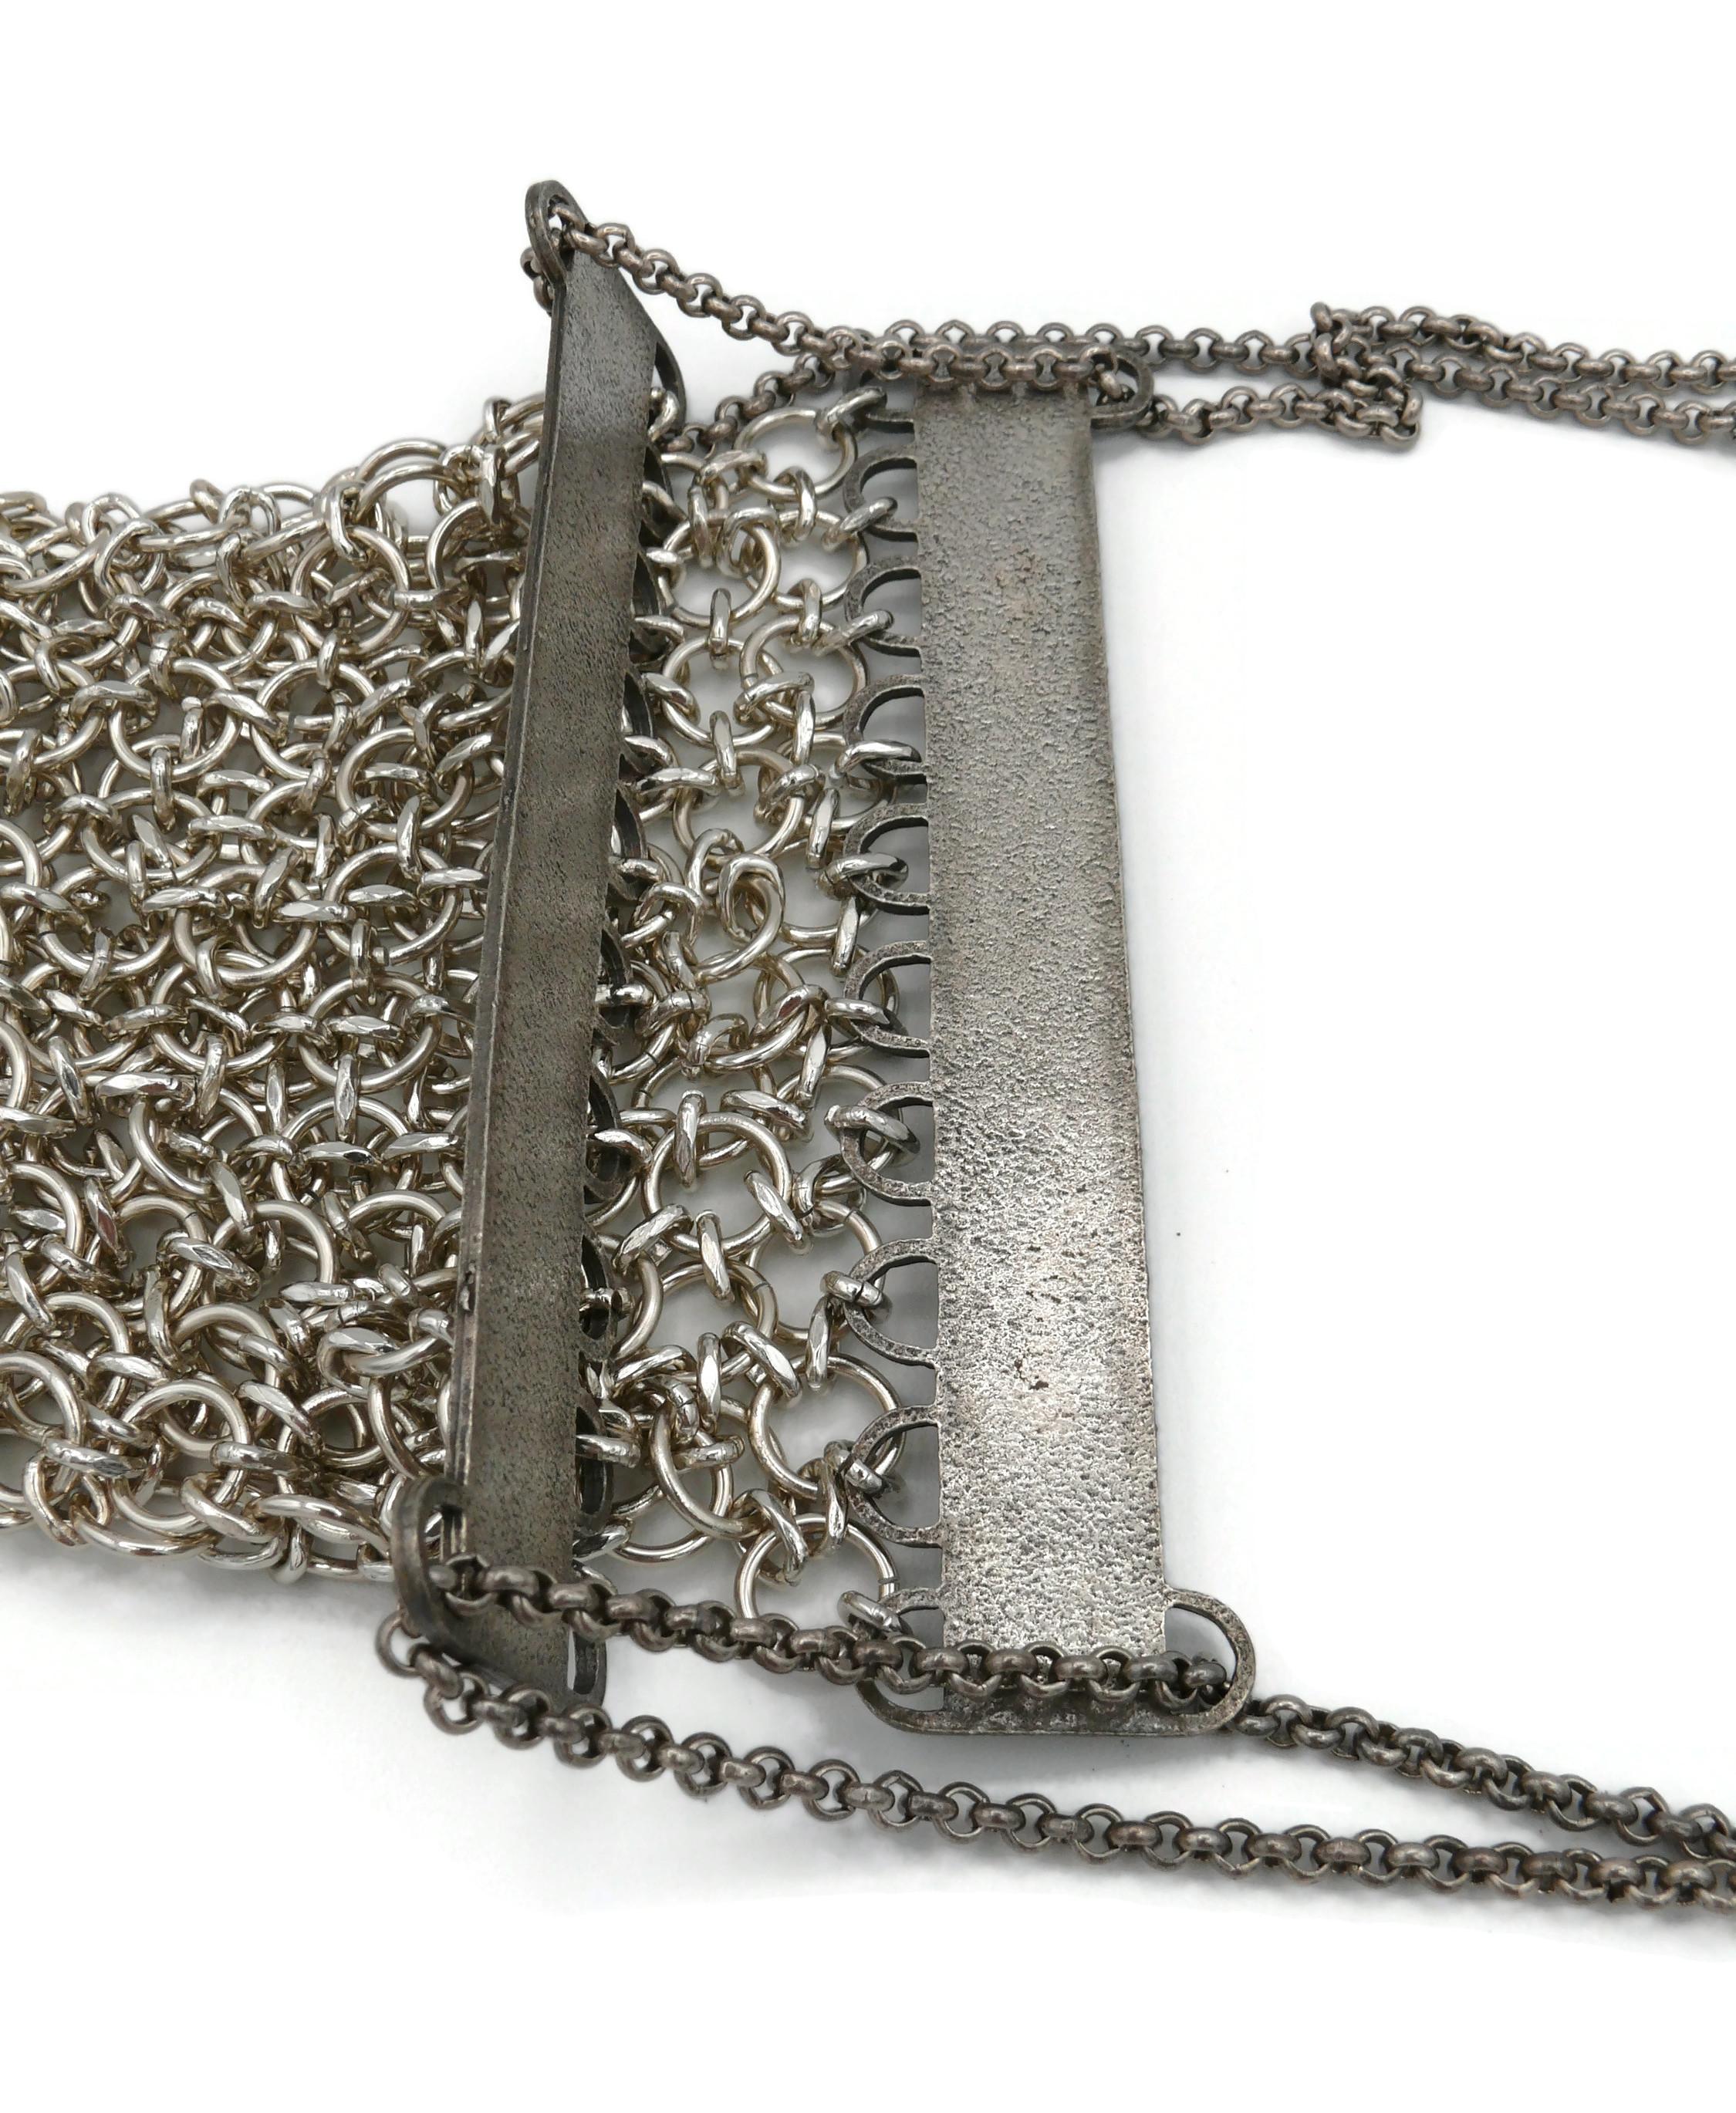 PACO RABANNE Vintage Mini Silver Tone Chainmail Messenger Bag For Sale 9